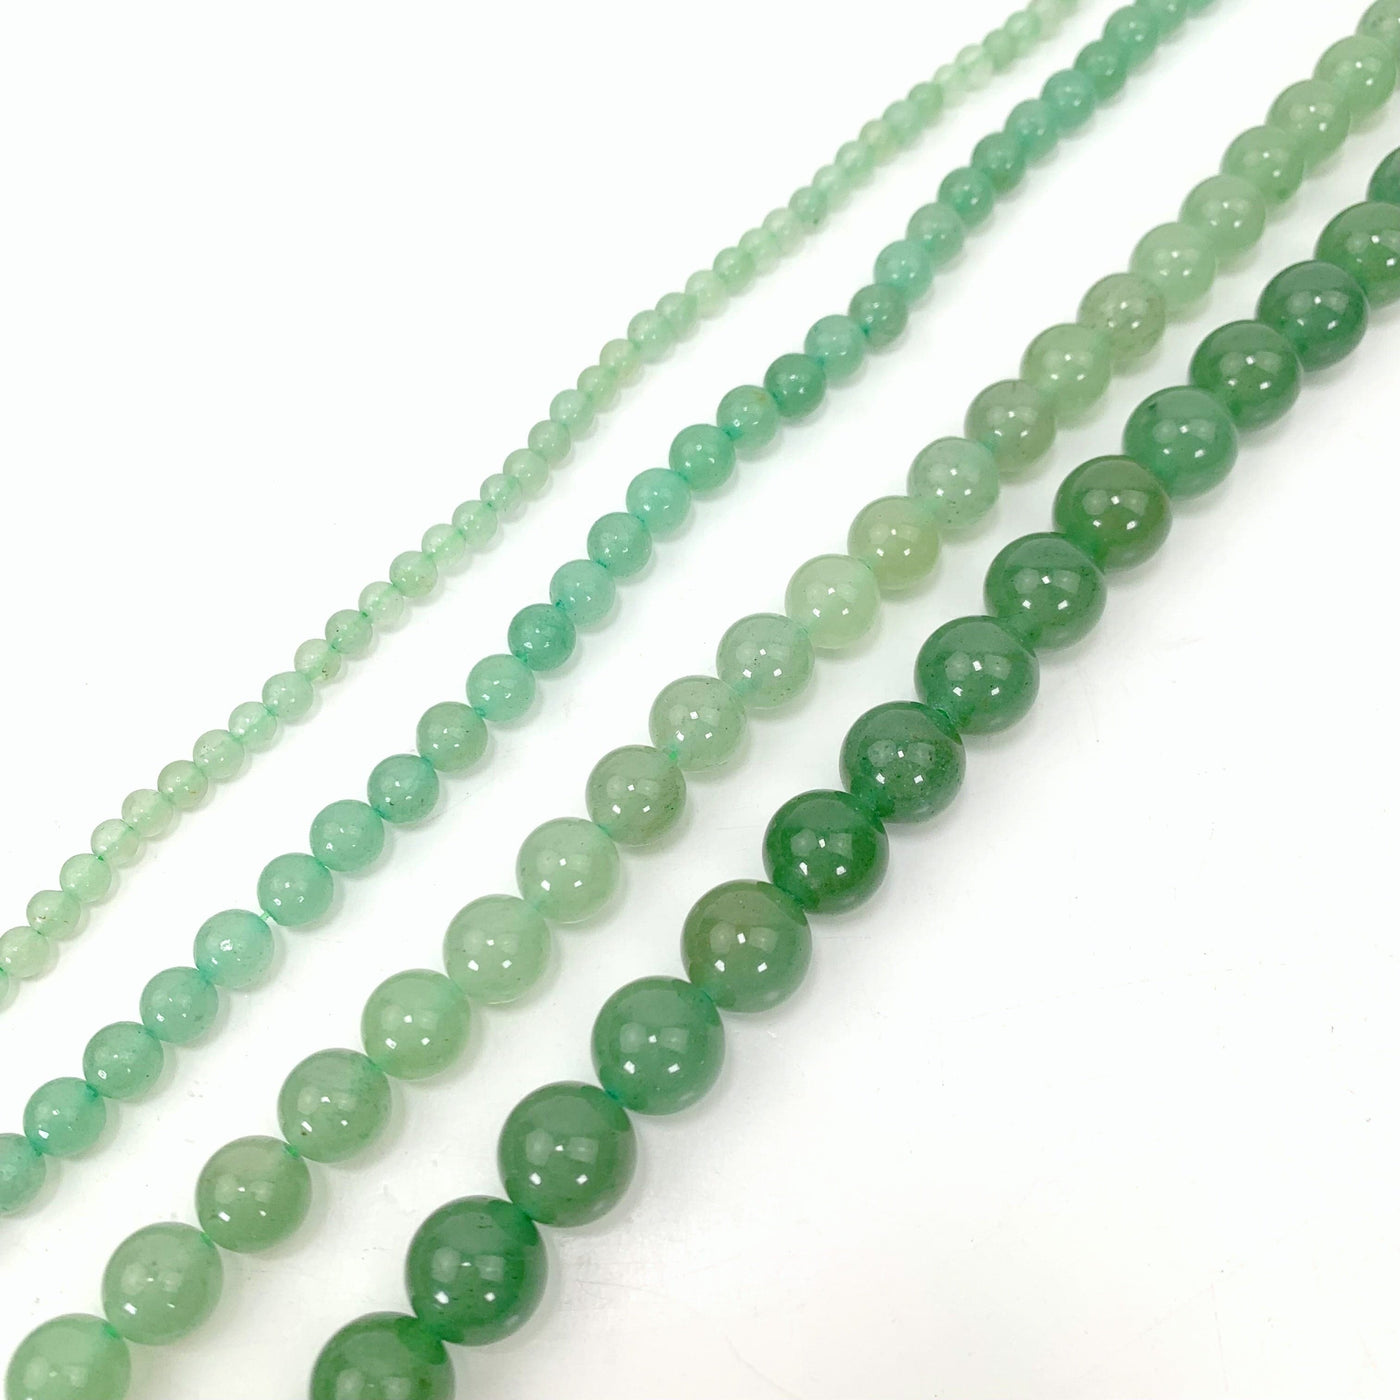 all 4 variations of green aventurine on a white background from left to right smallest to biggest